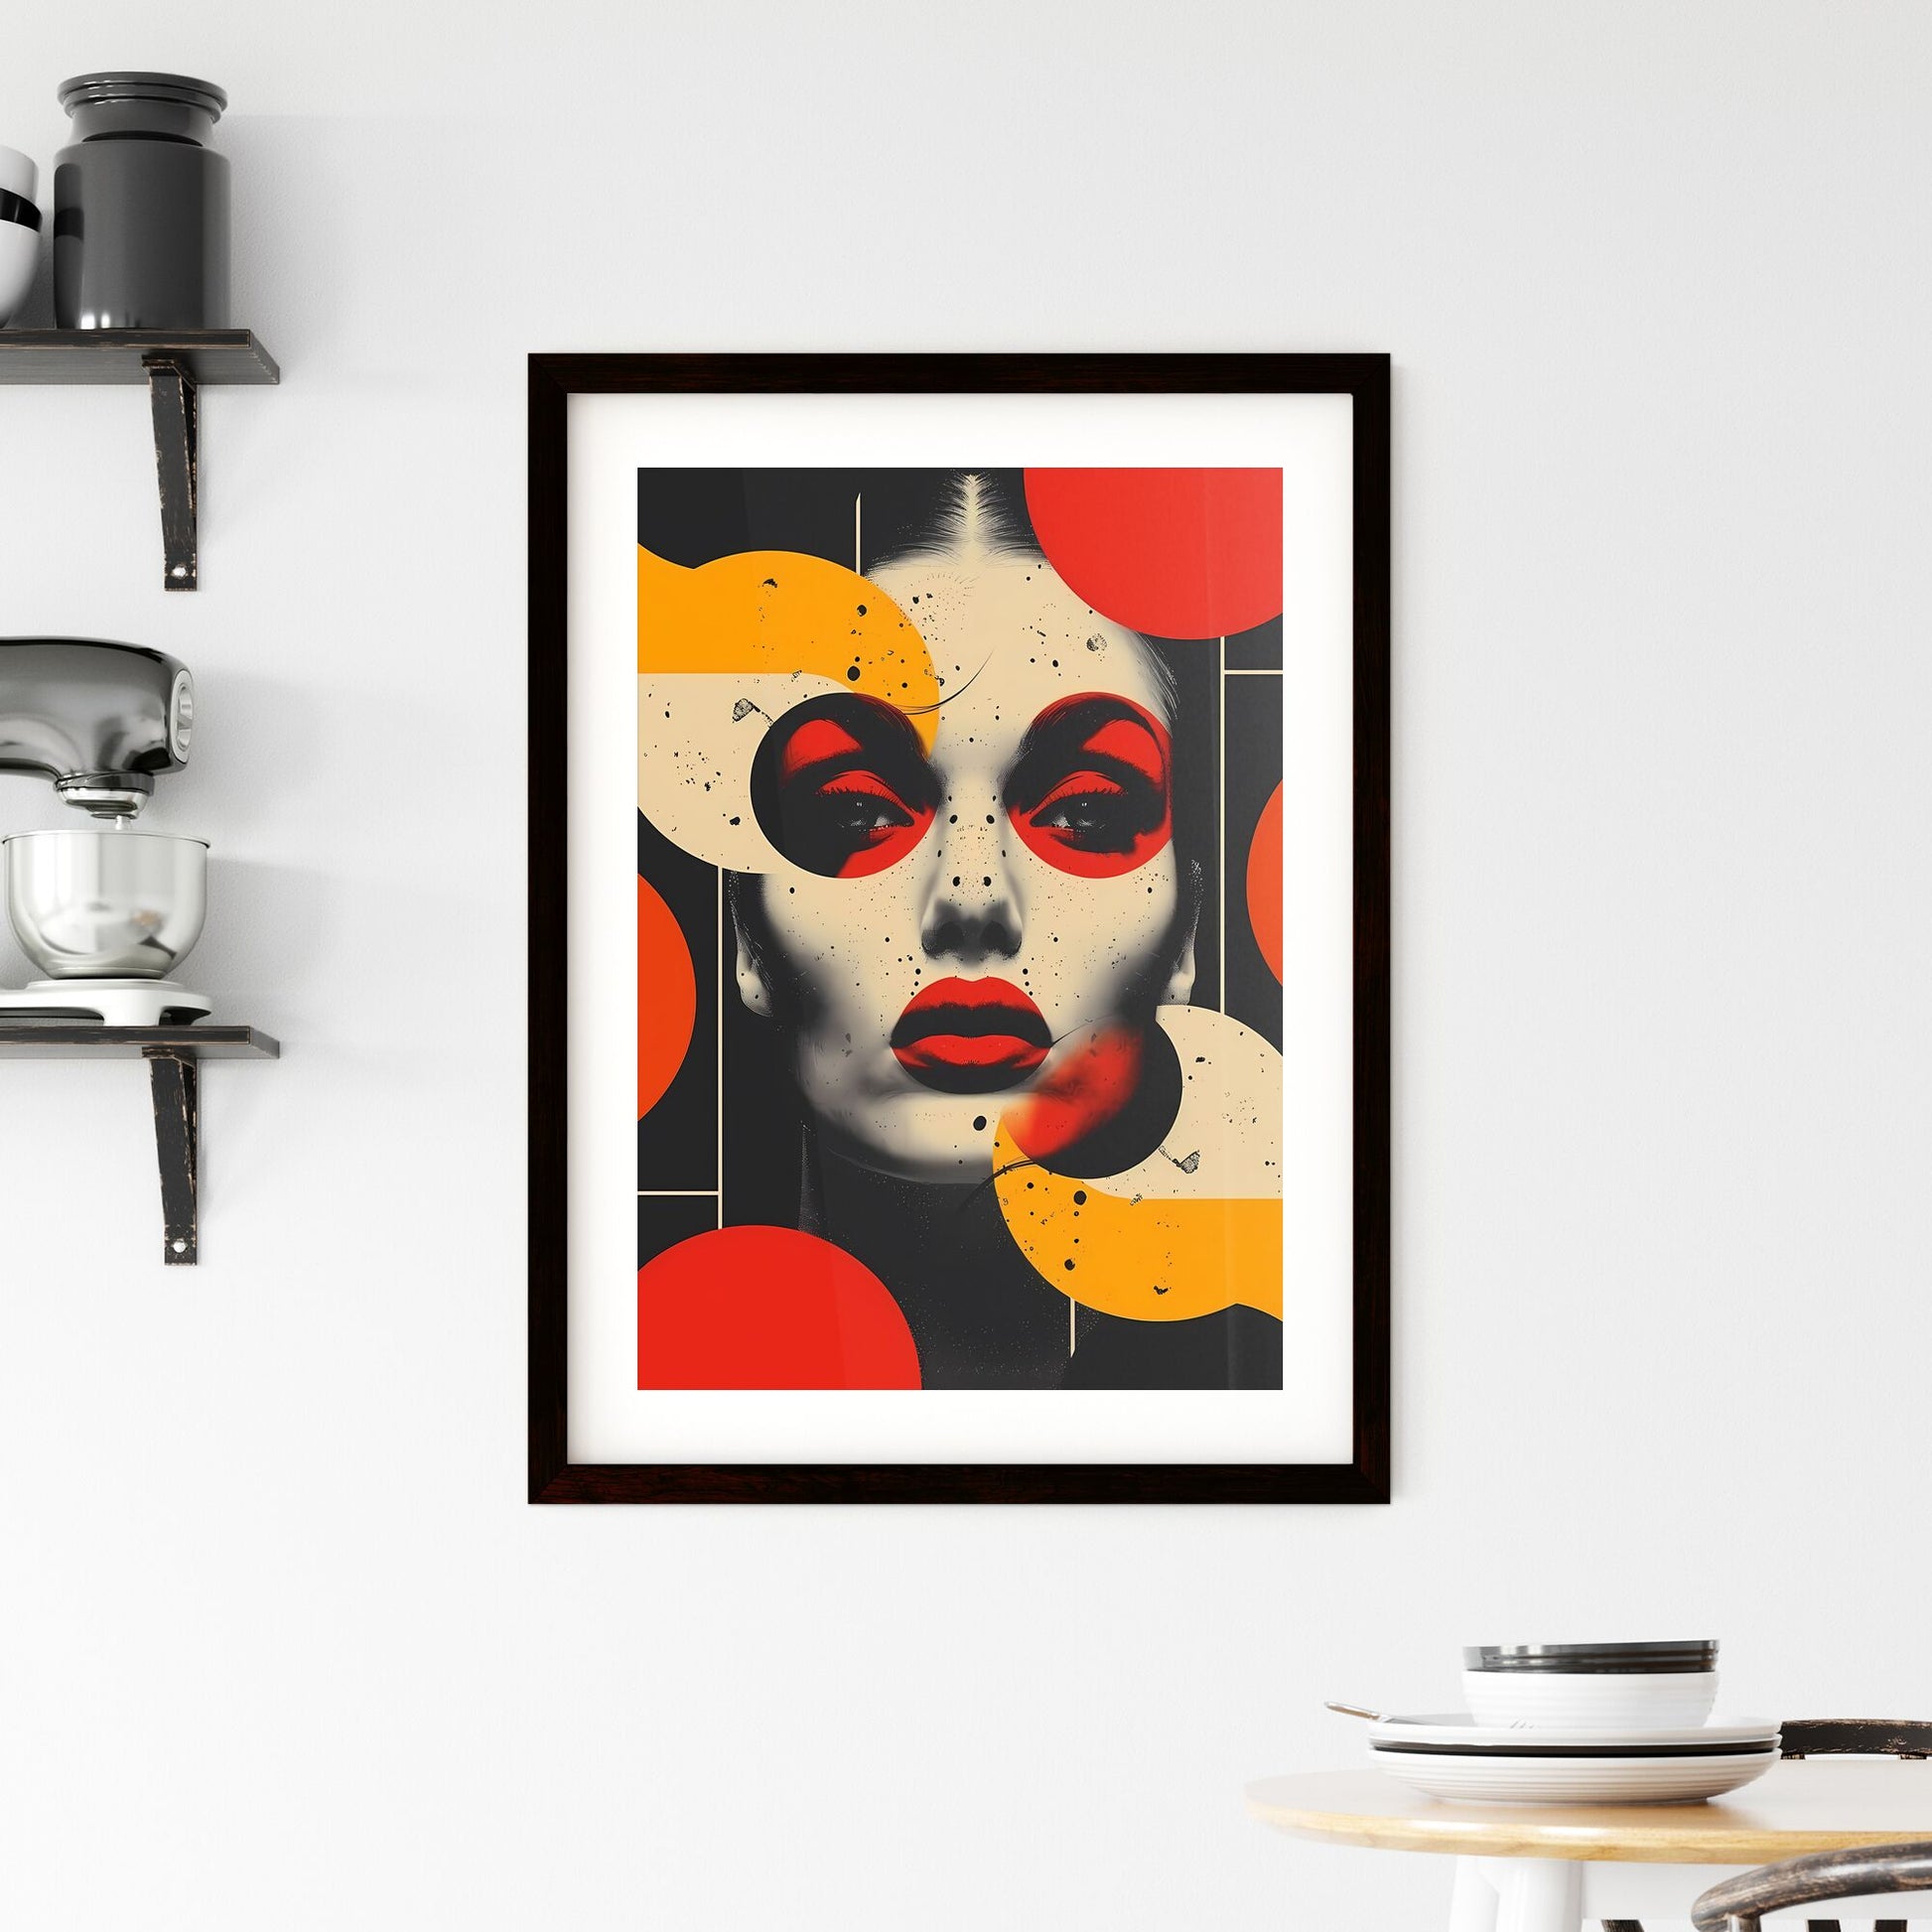 Striking Psychedelic Art Poster Embodies 1960s-1980s Design Aesthetics: Woman with Red Lips and Captivating Black and White Circles Default Title